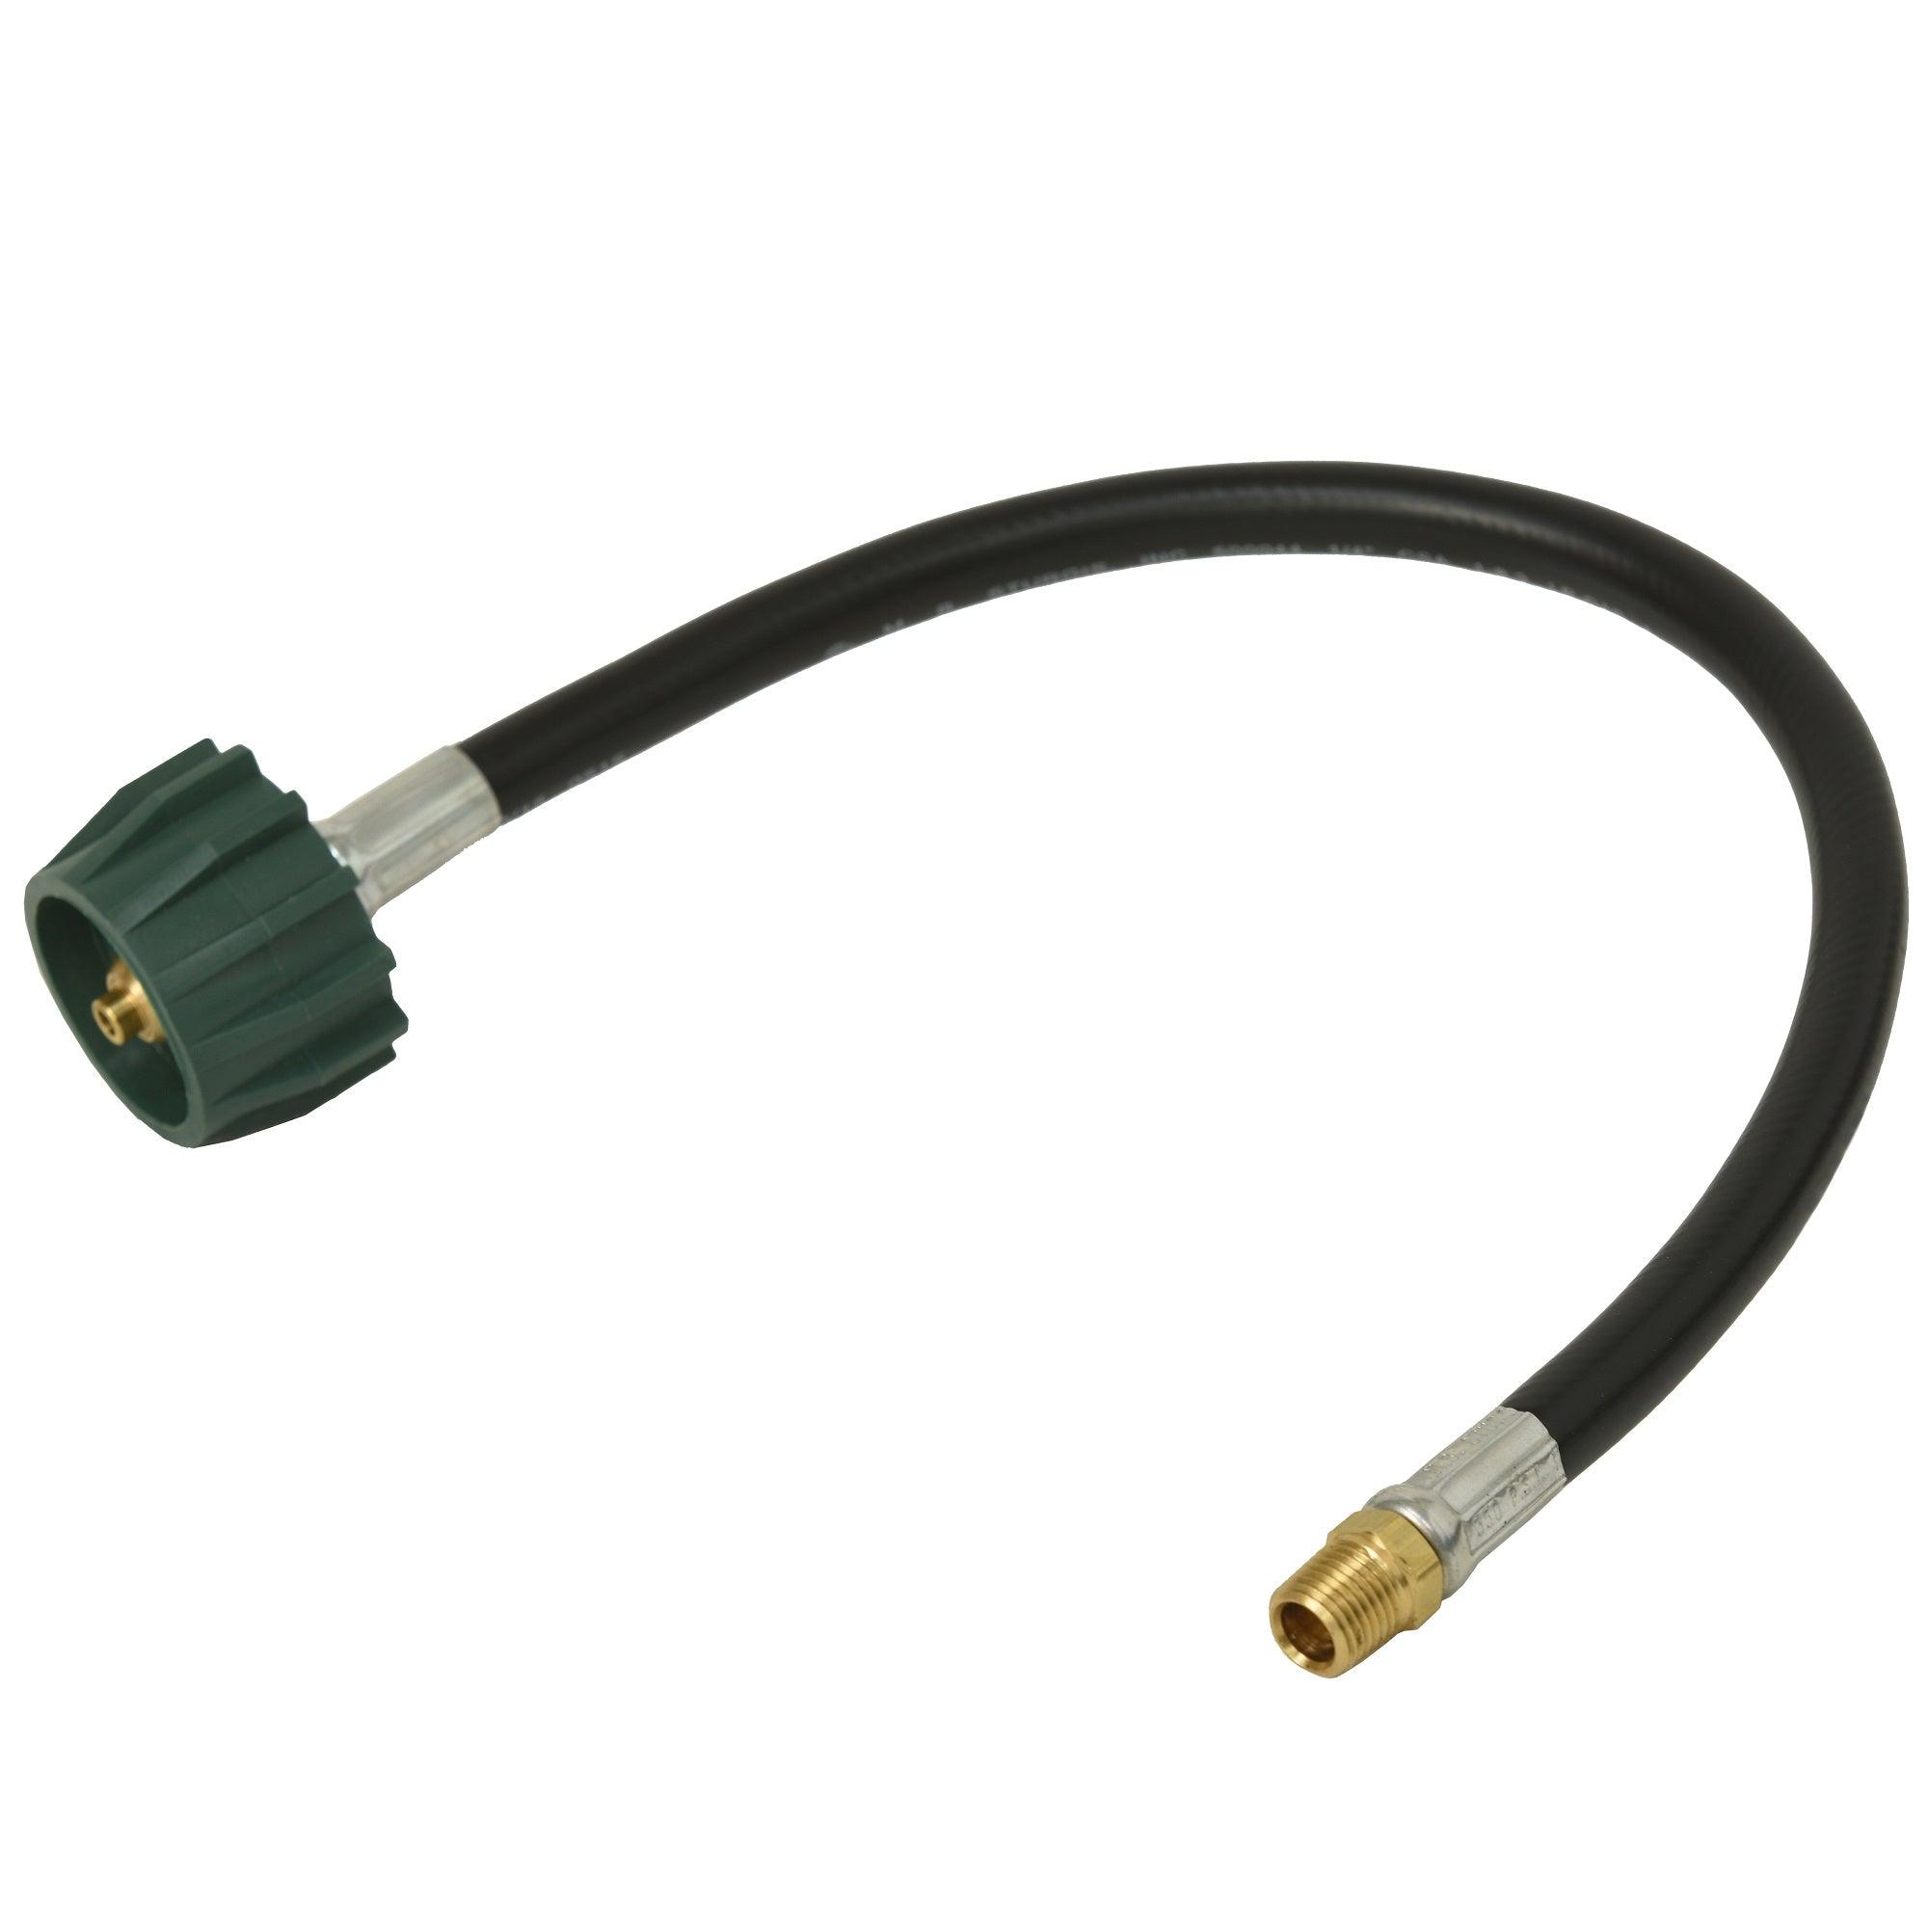 Flame King Pigtail Propane Hose Connector 18 Inch - Flame King